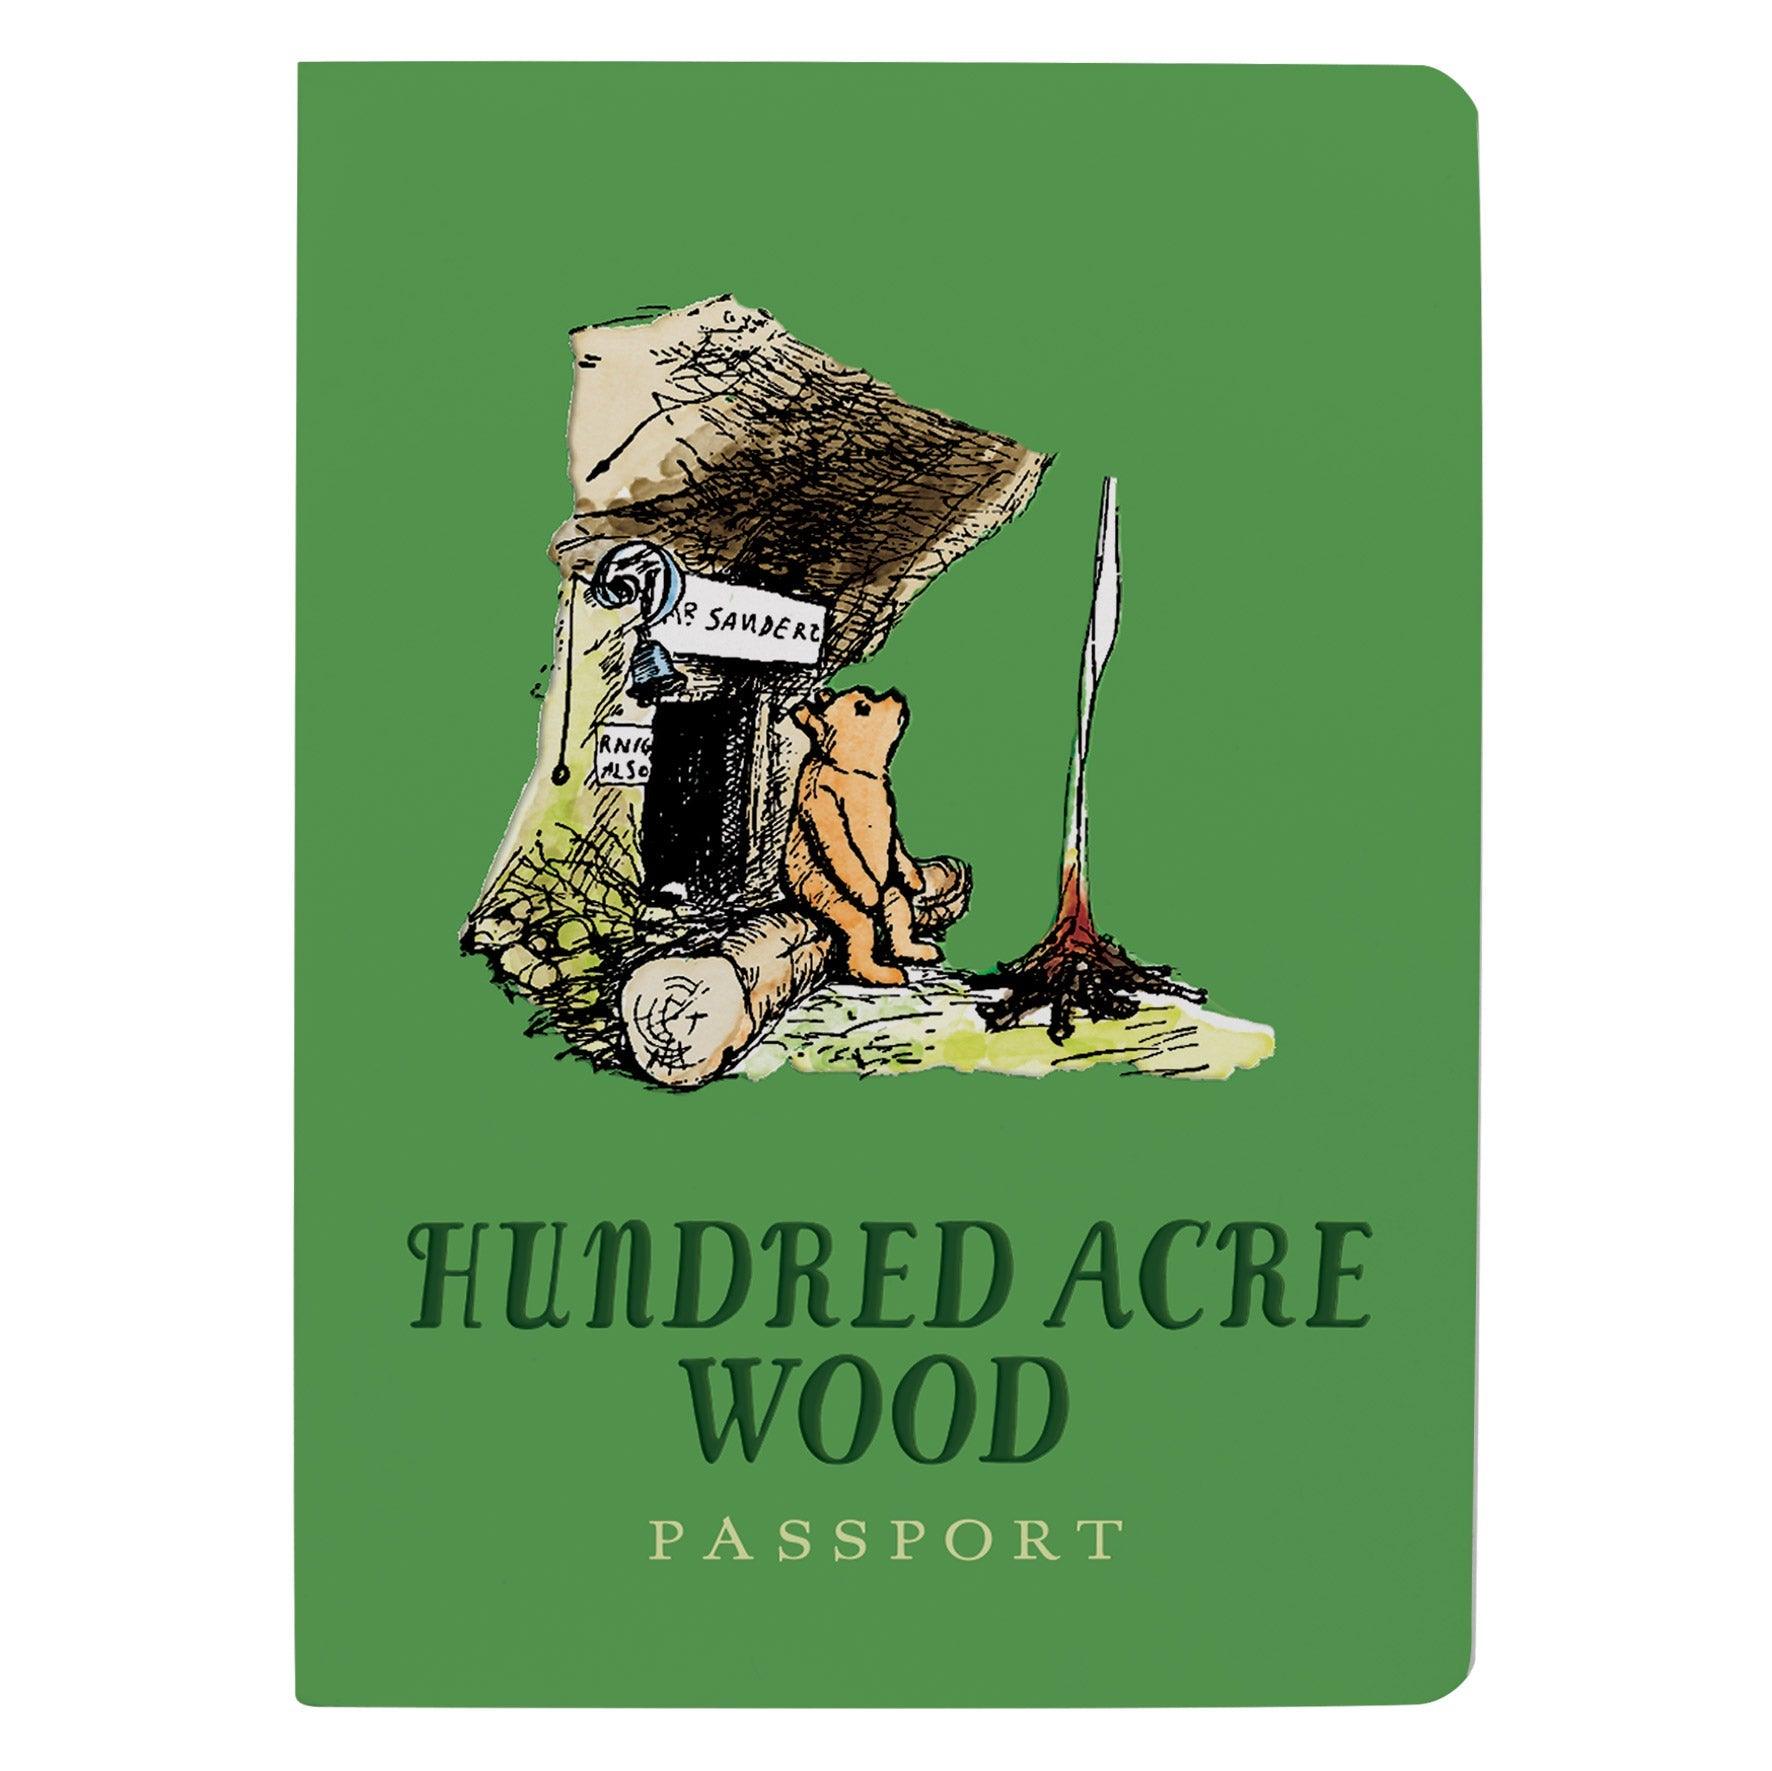 Product photo of Hundred Acre Wood Passport, a novelty gift manufactured by The Unemployed Philosophers Guild.